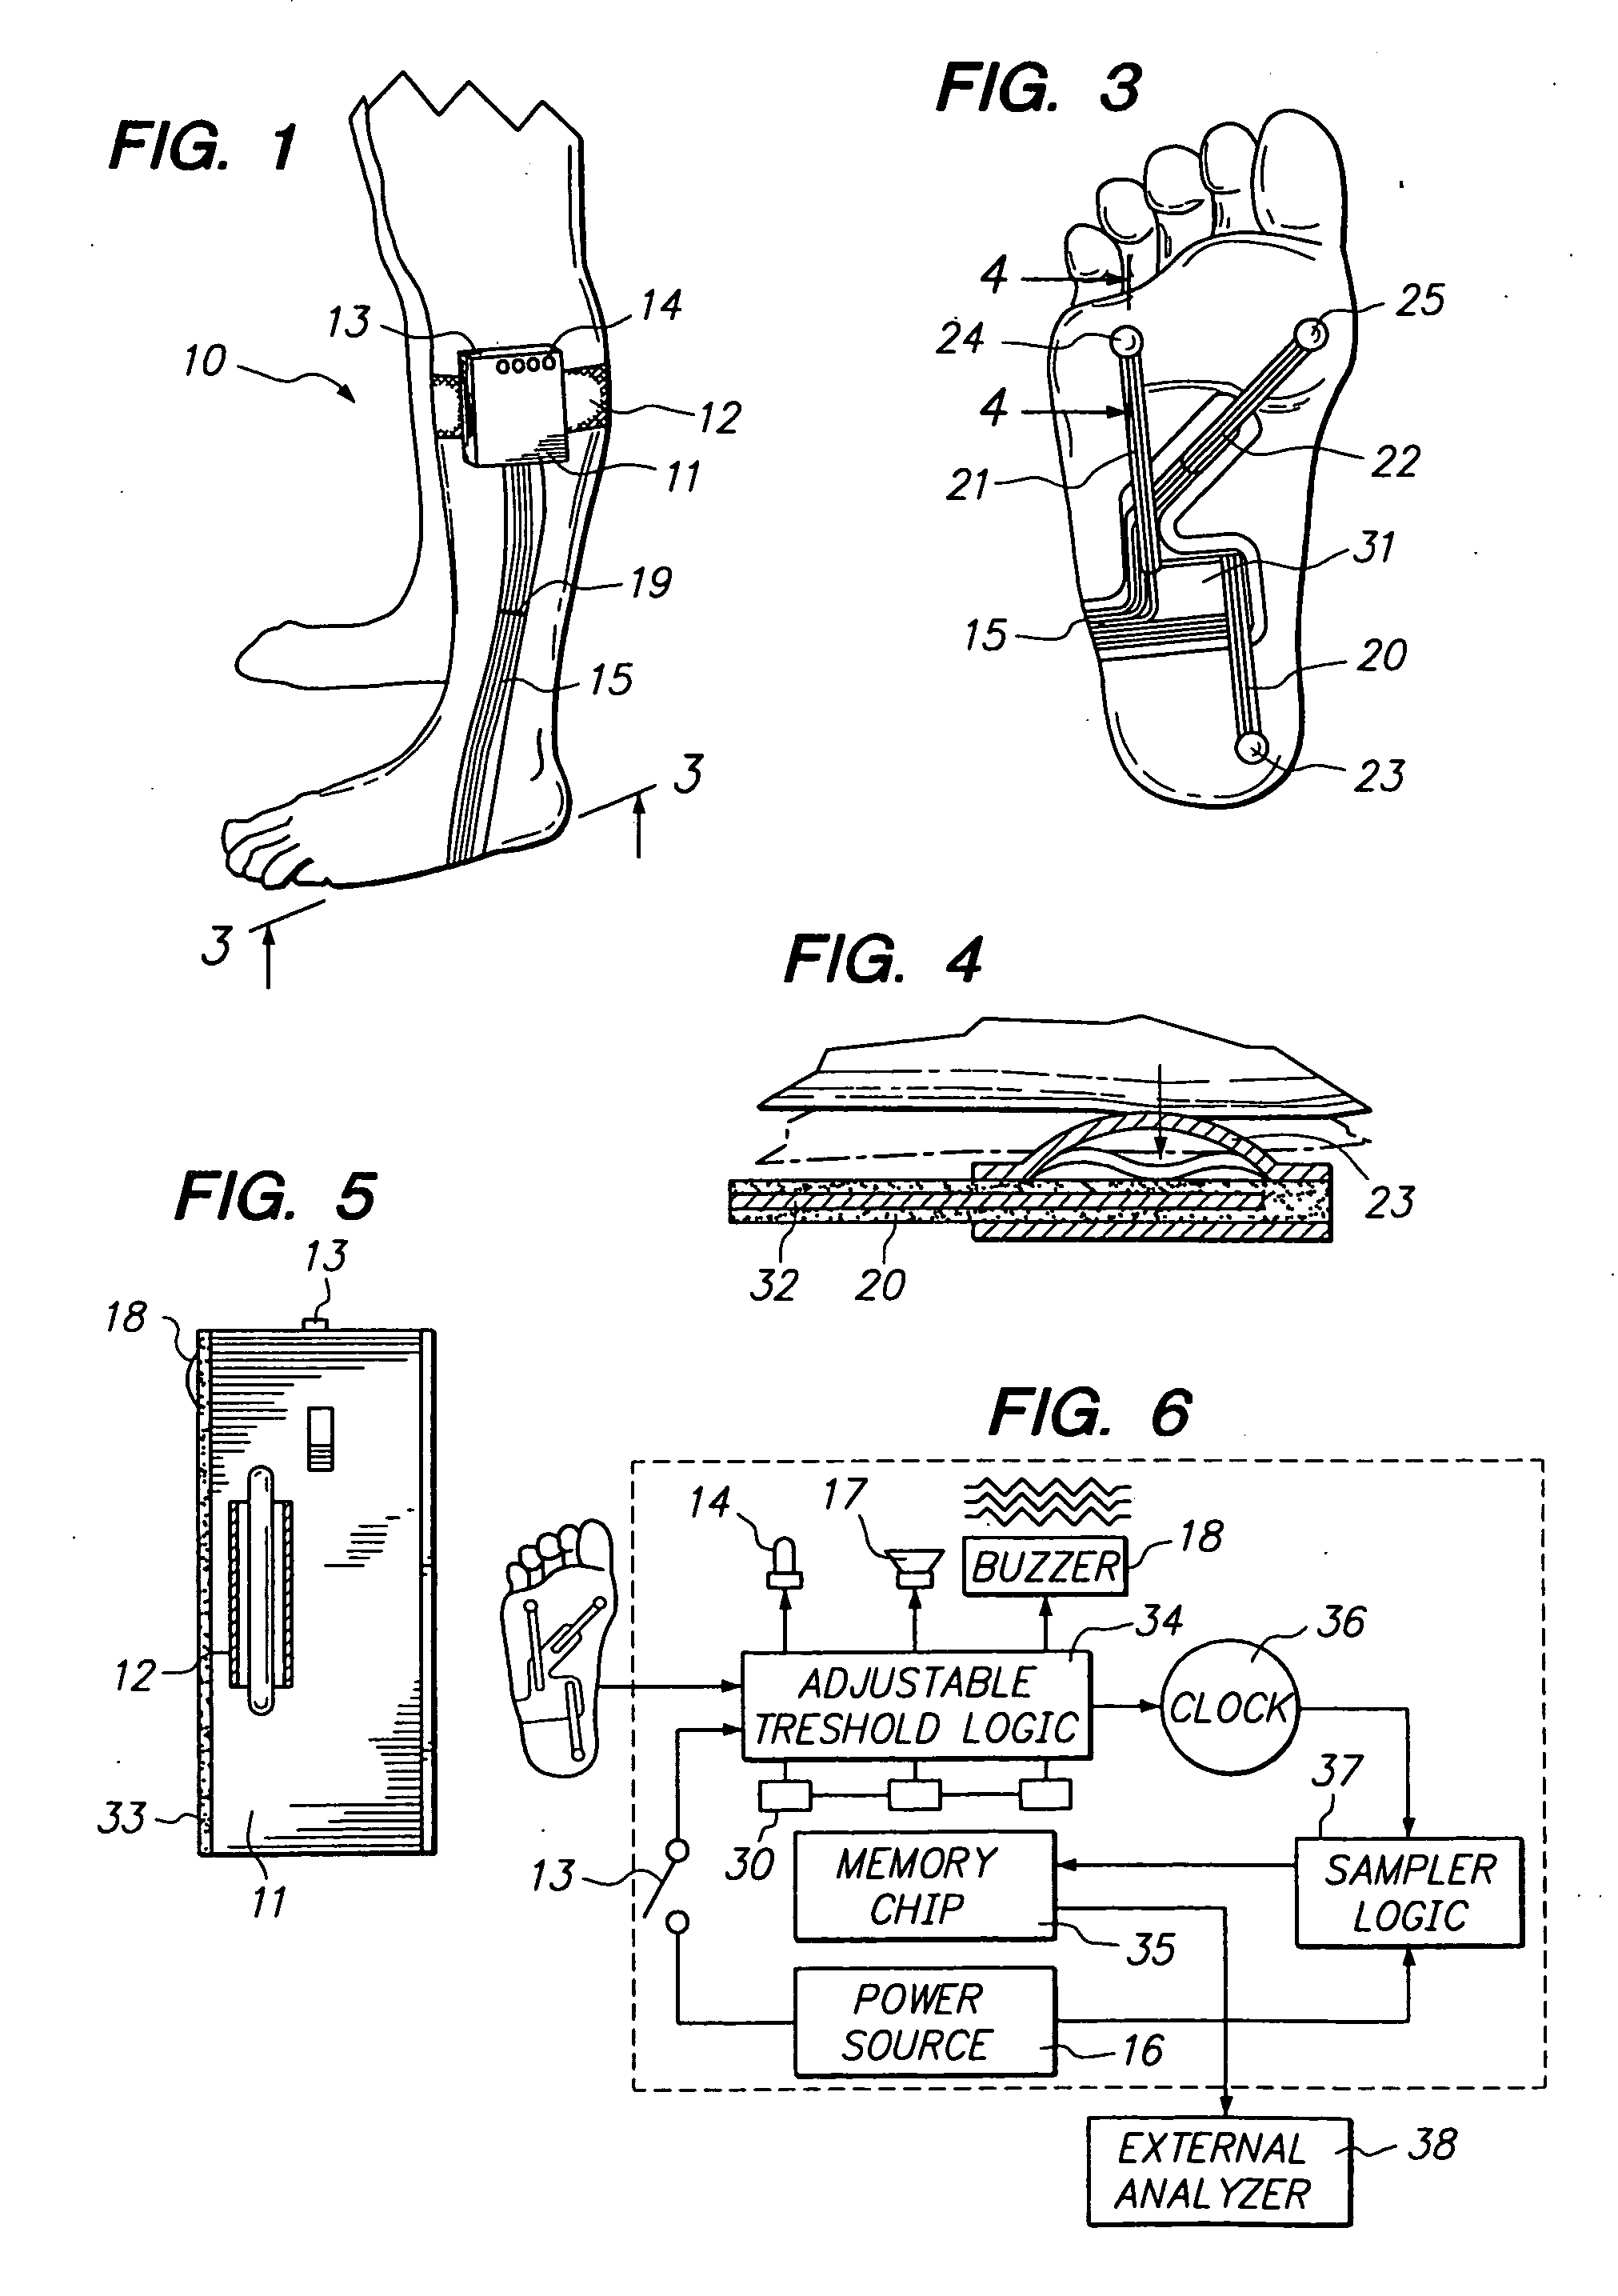 Sensor and analyzer for determining physiological limitations